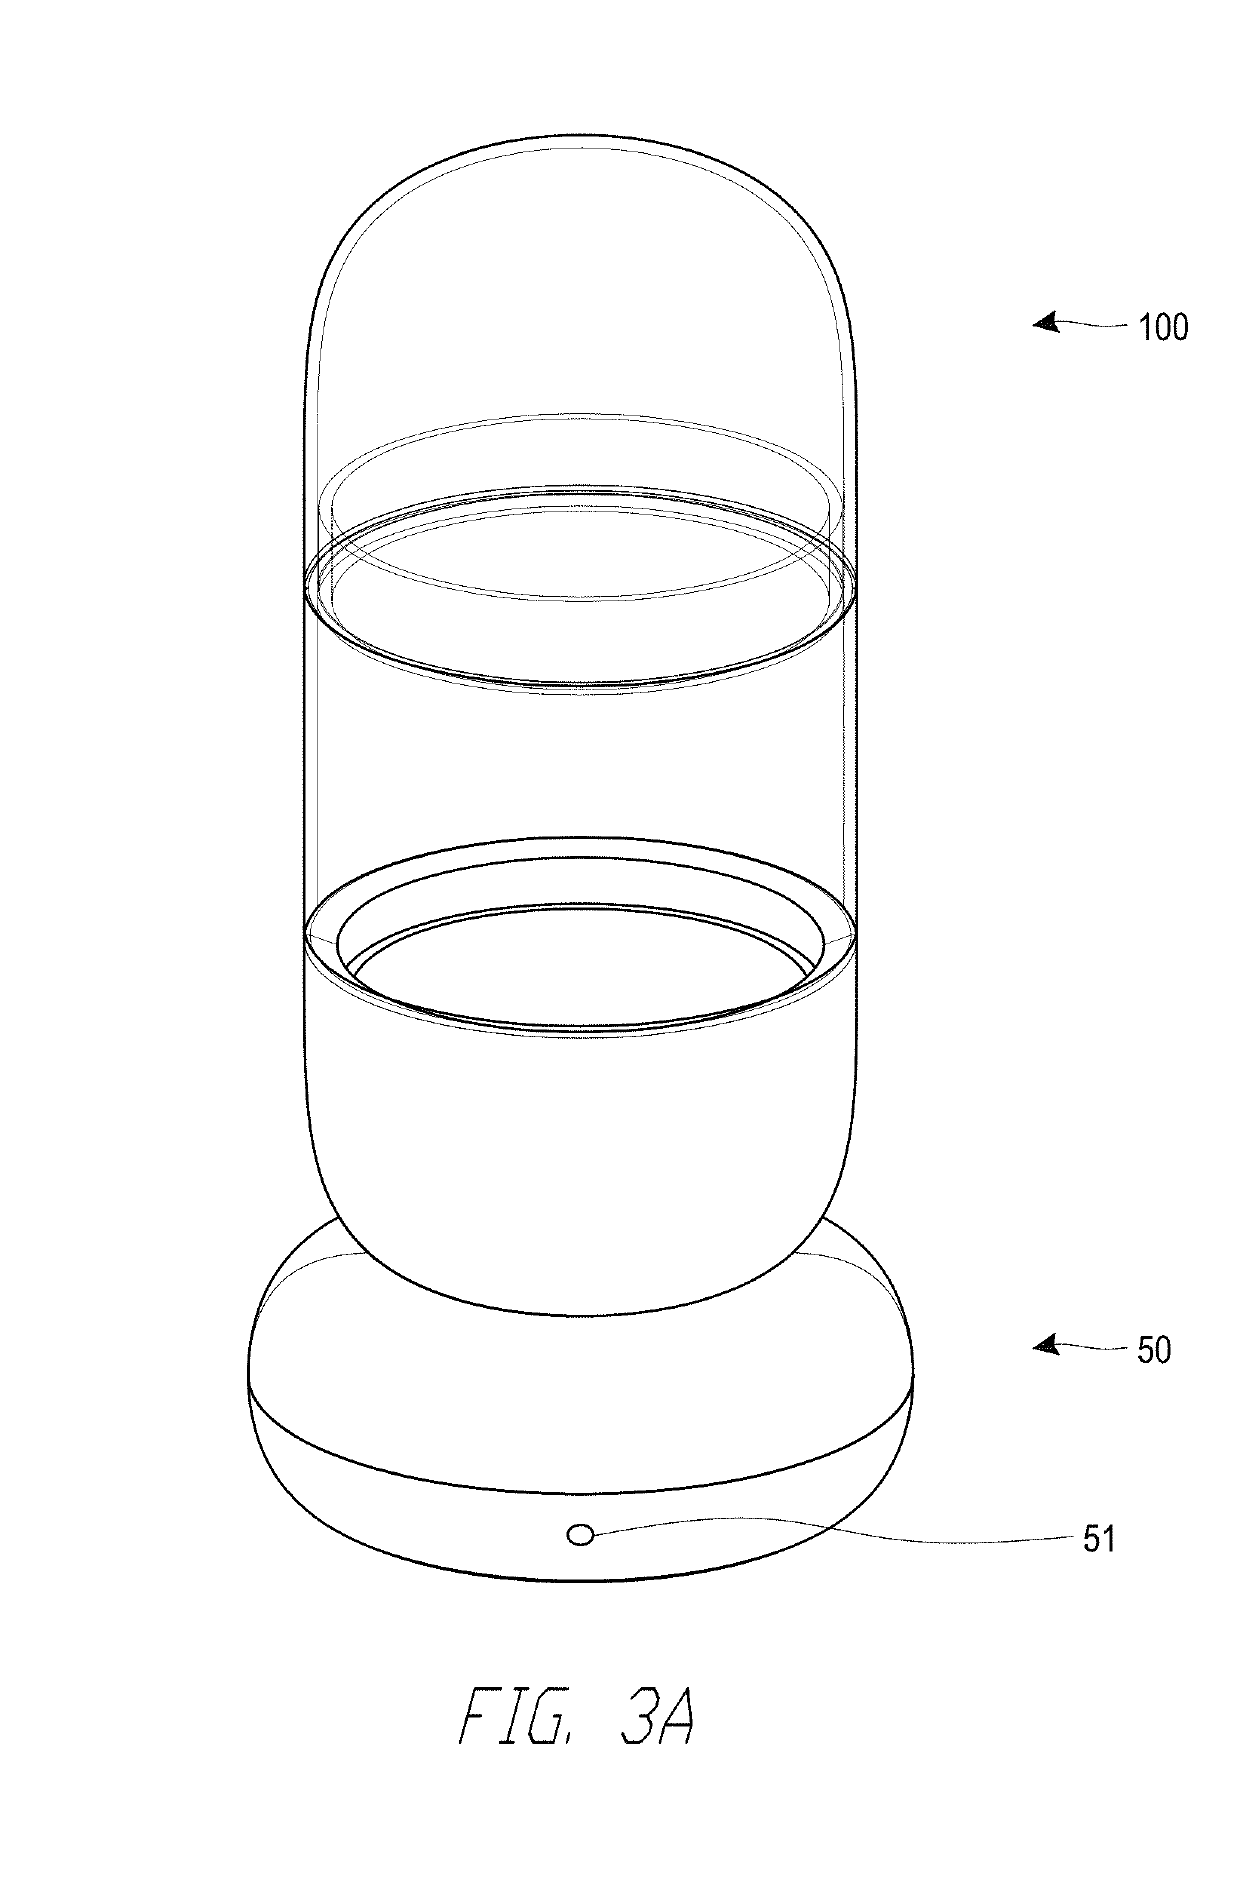 Actively heated or cooled infant bottle system